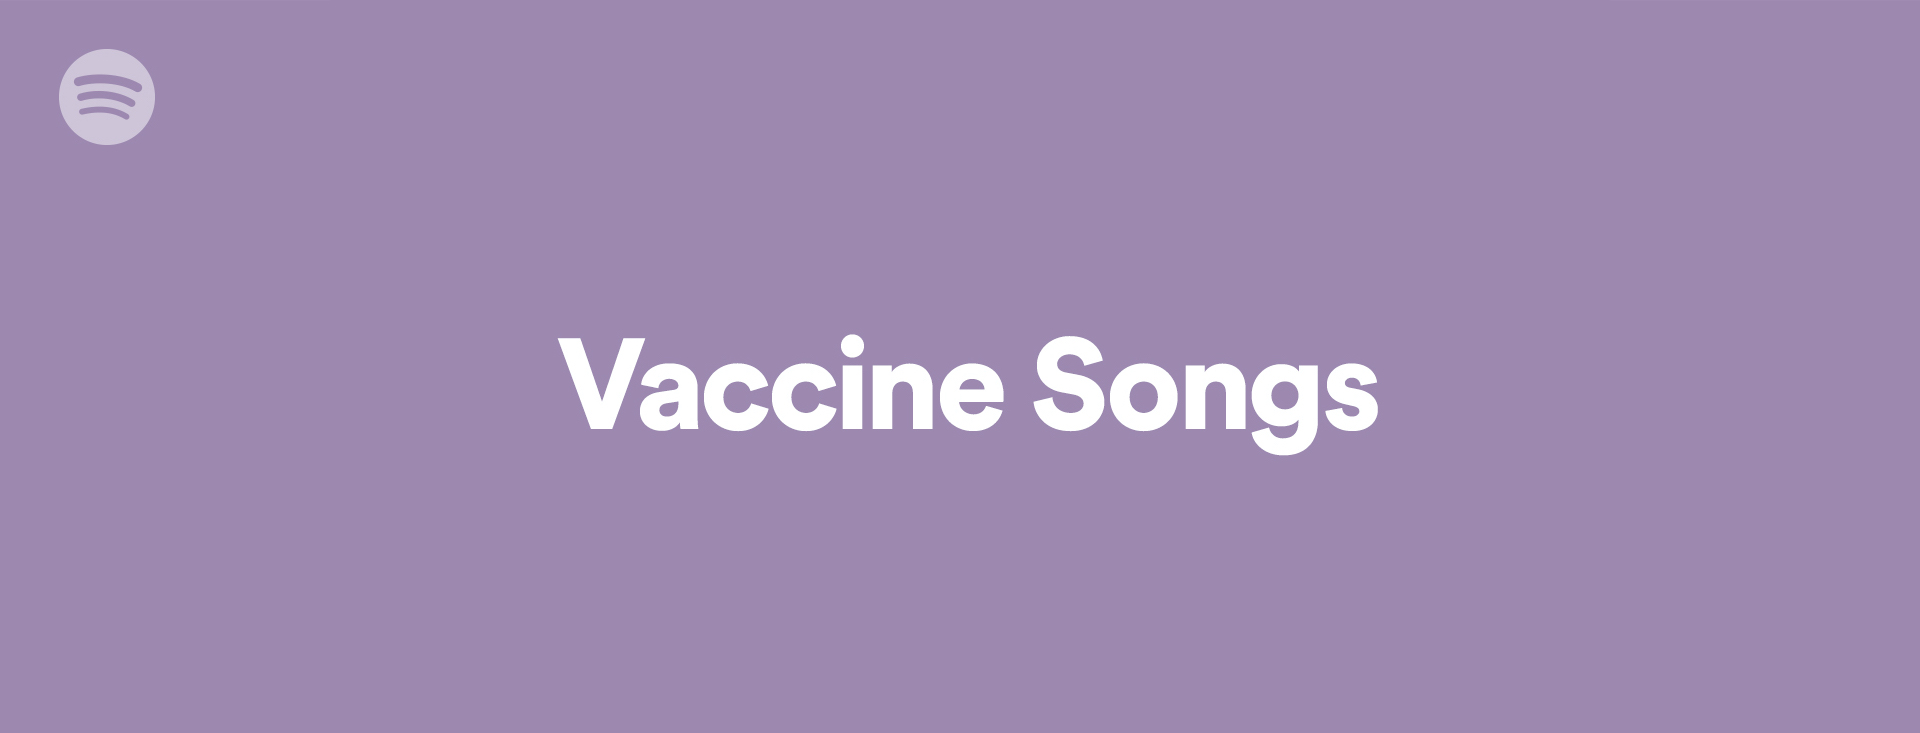 Spotify’s songs to get vaccinated to